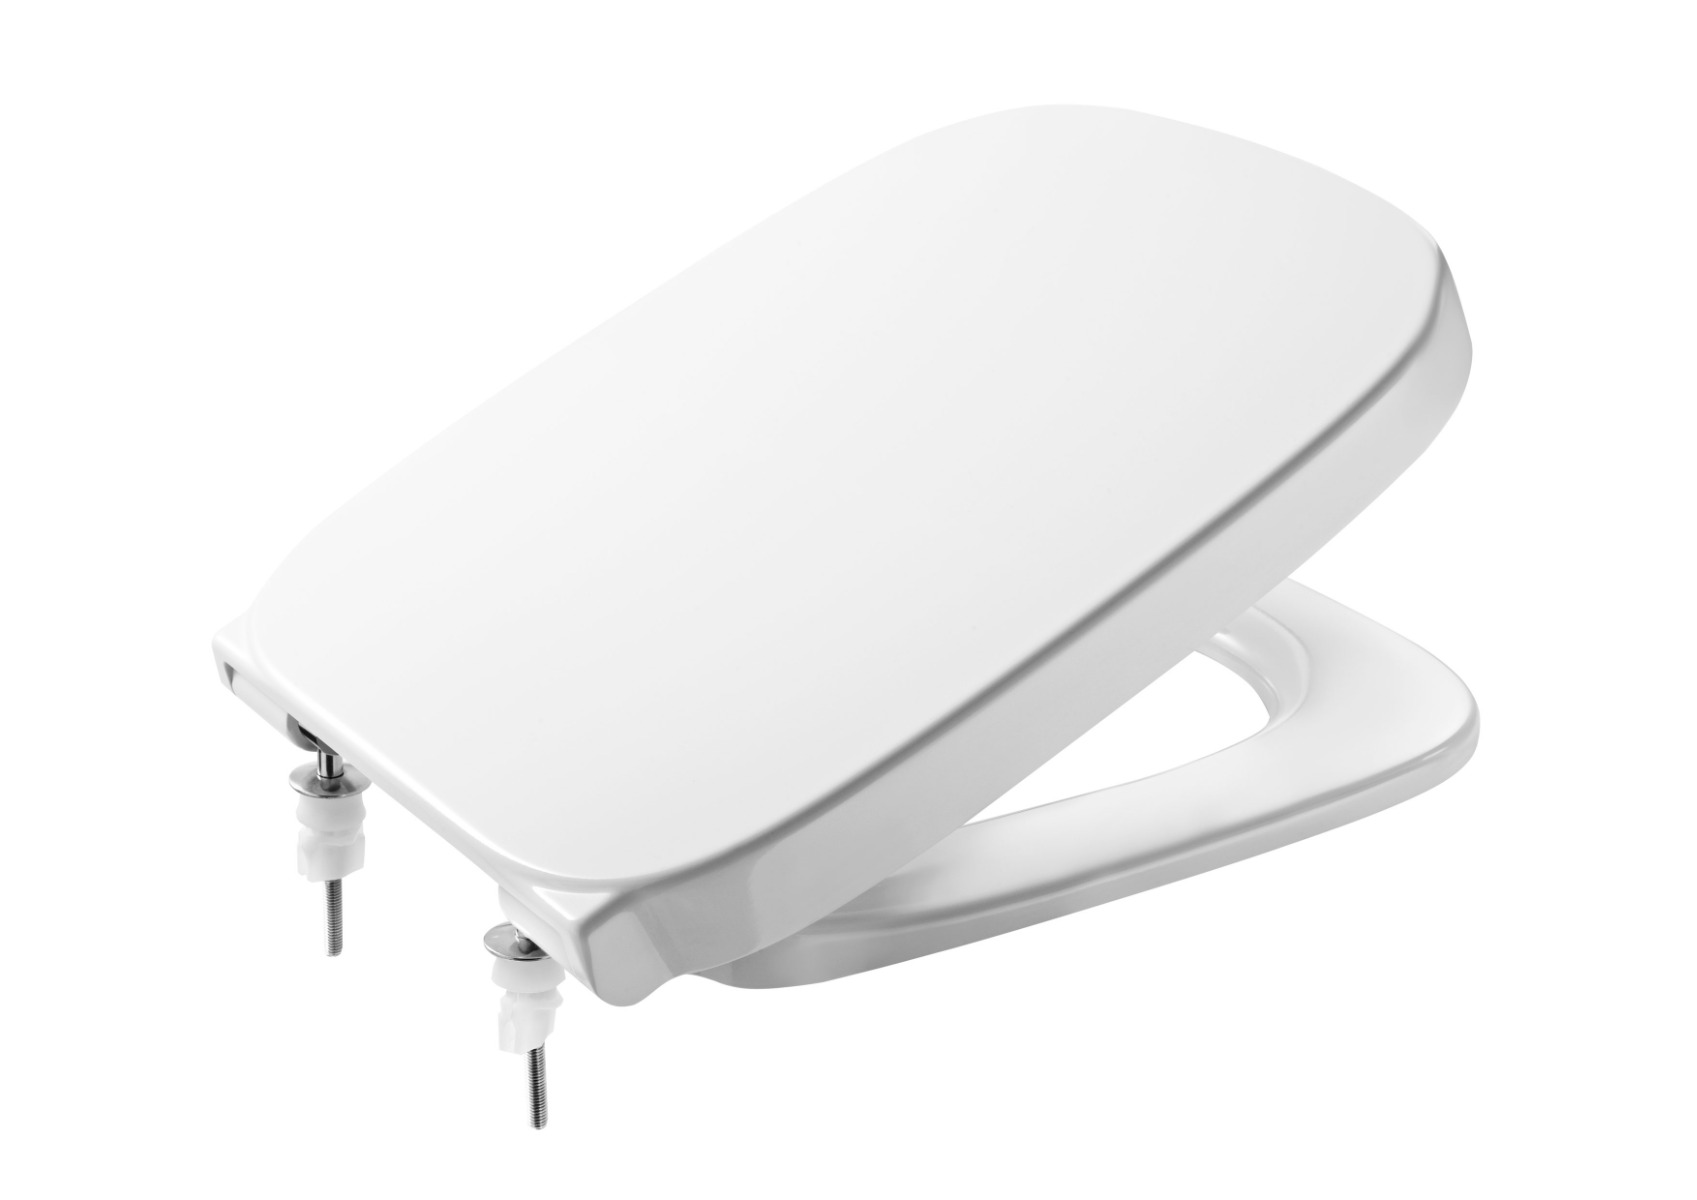 Soft-closing toilet seat and cover Z8019B200U